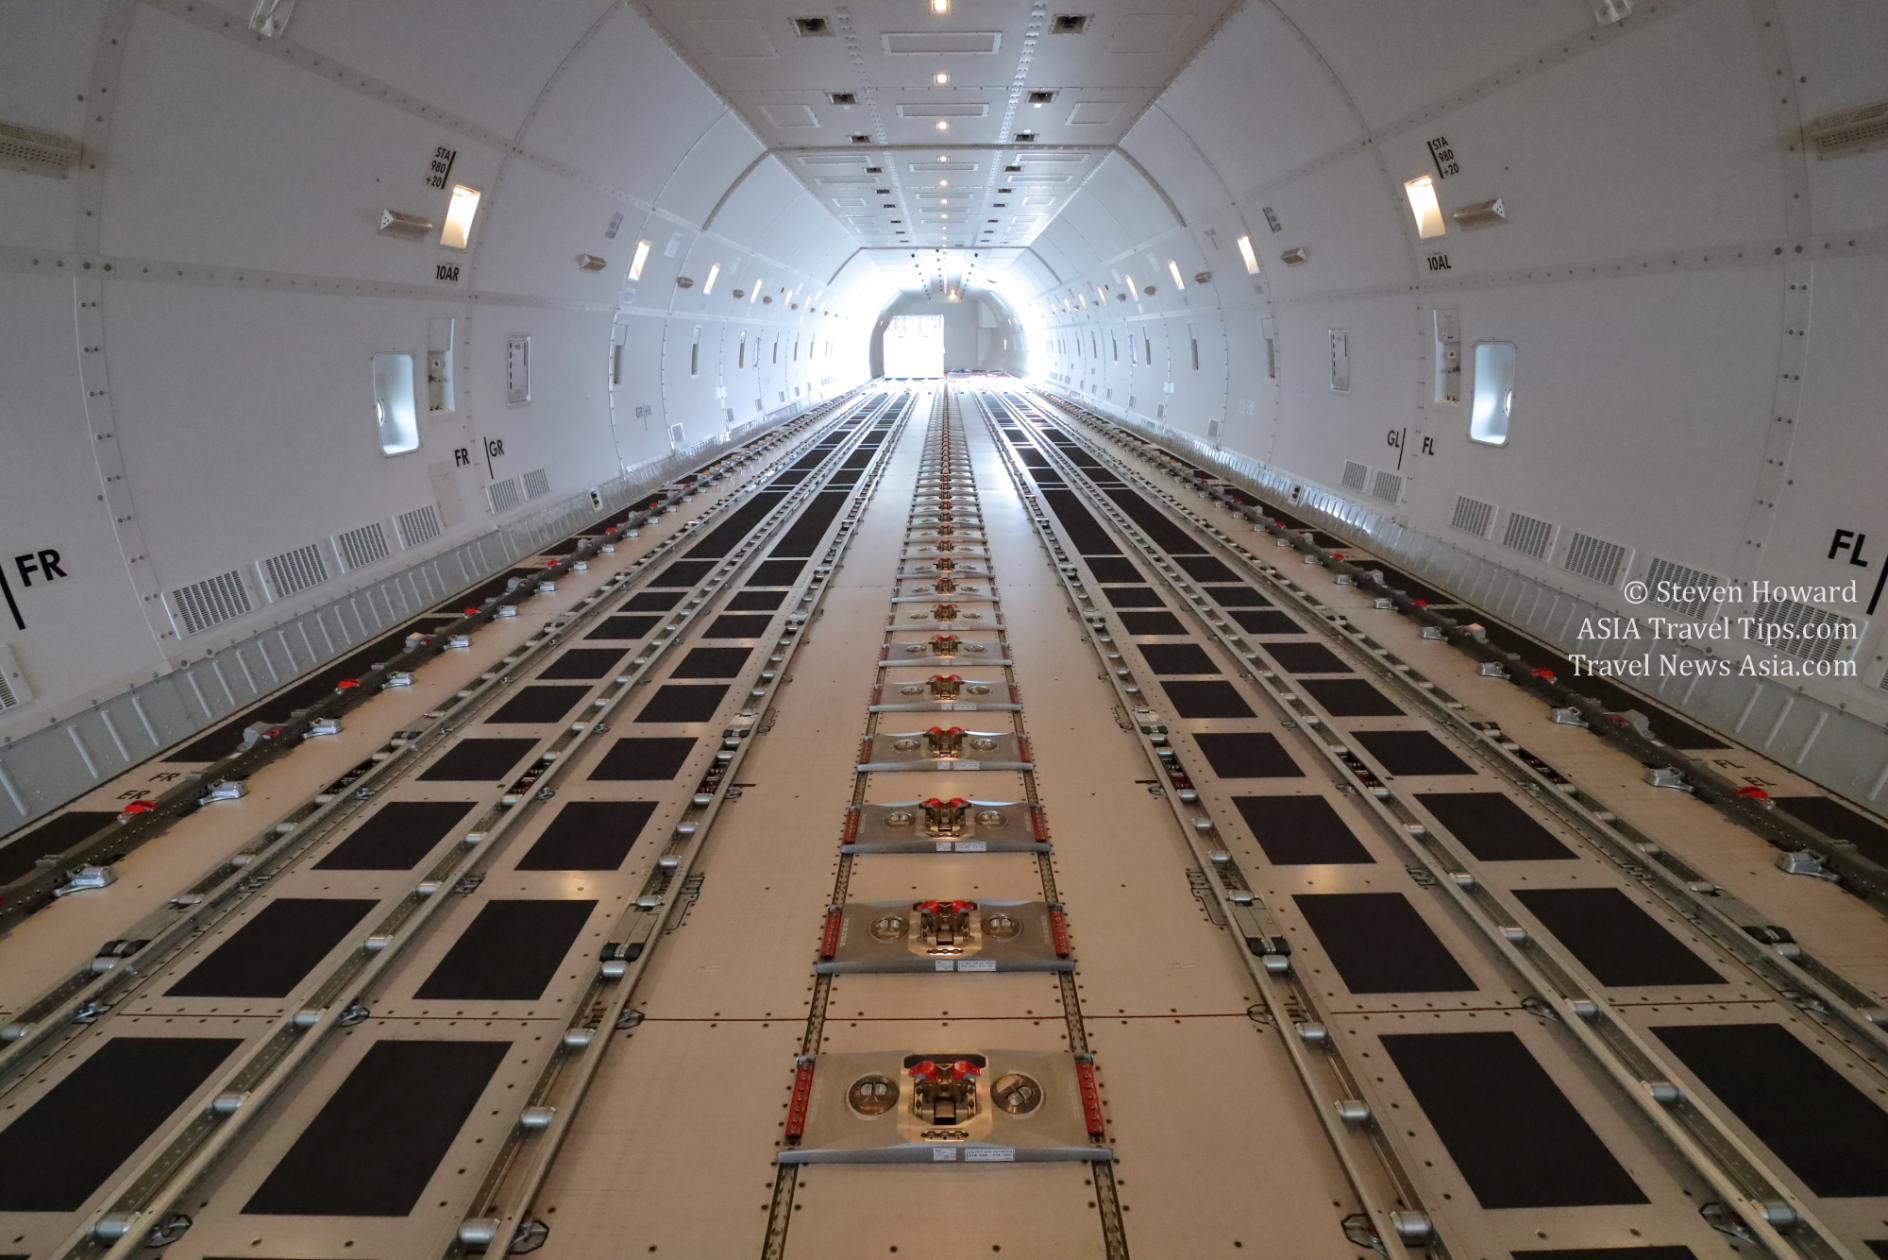 Inside a Qatar Airways Boeing 747F. Picture by Steven Howard of TravelNewsAsia.com Click to enlarge.